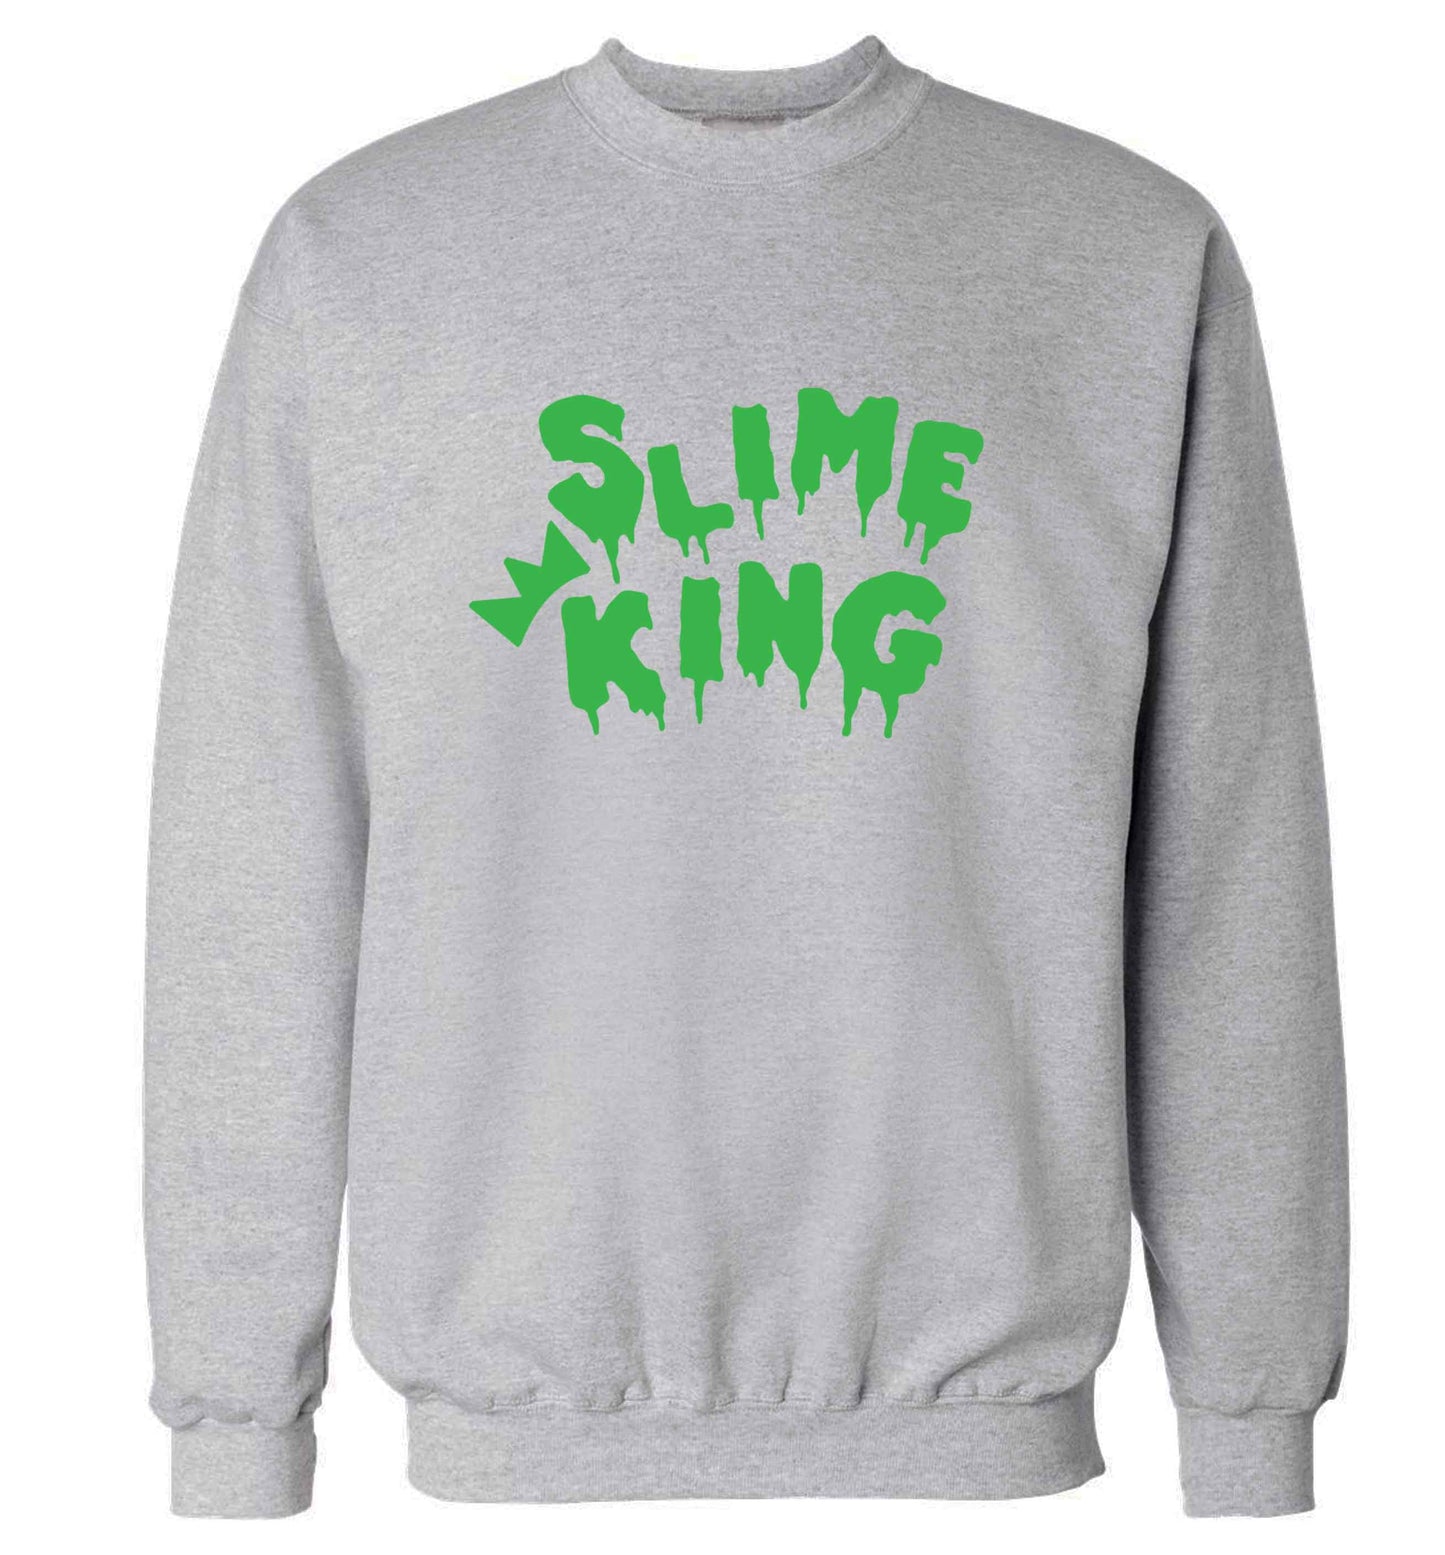 Neon green slime king adult's unisex grey sweater 2XL